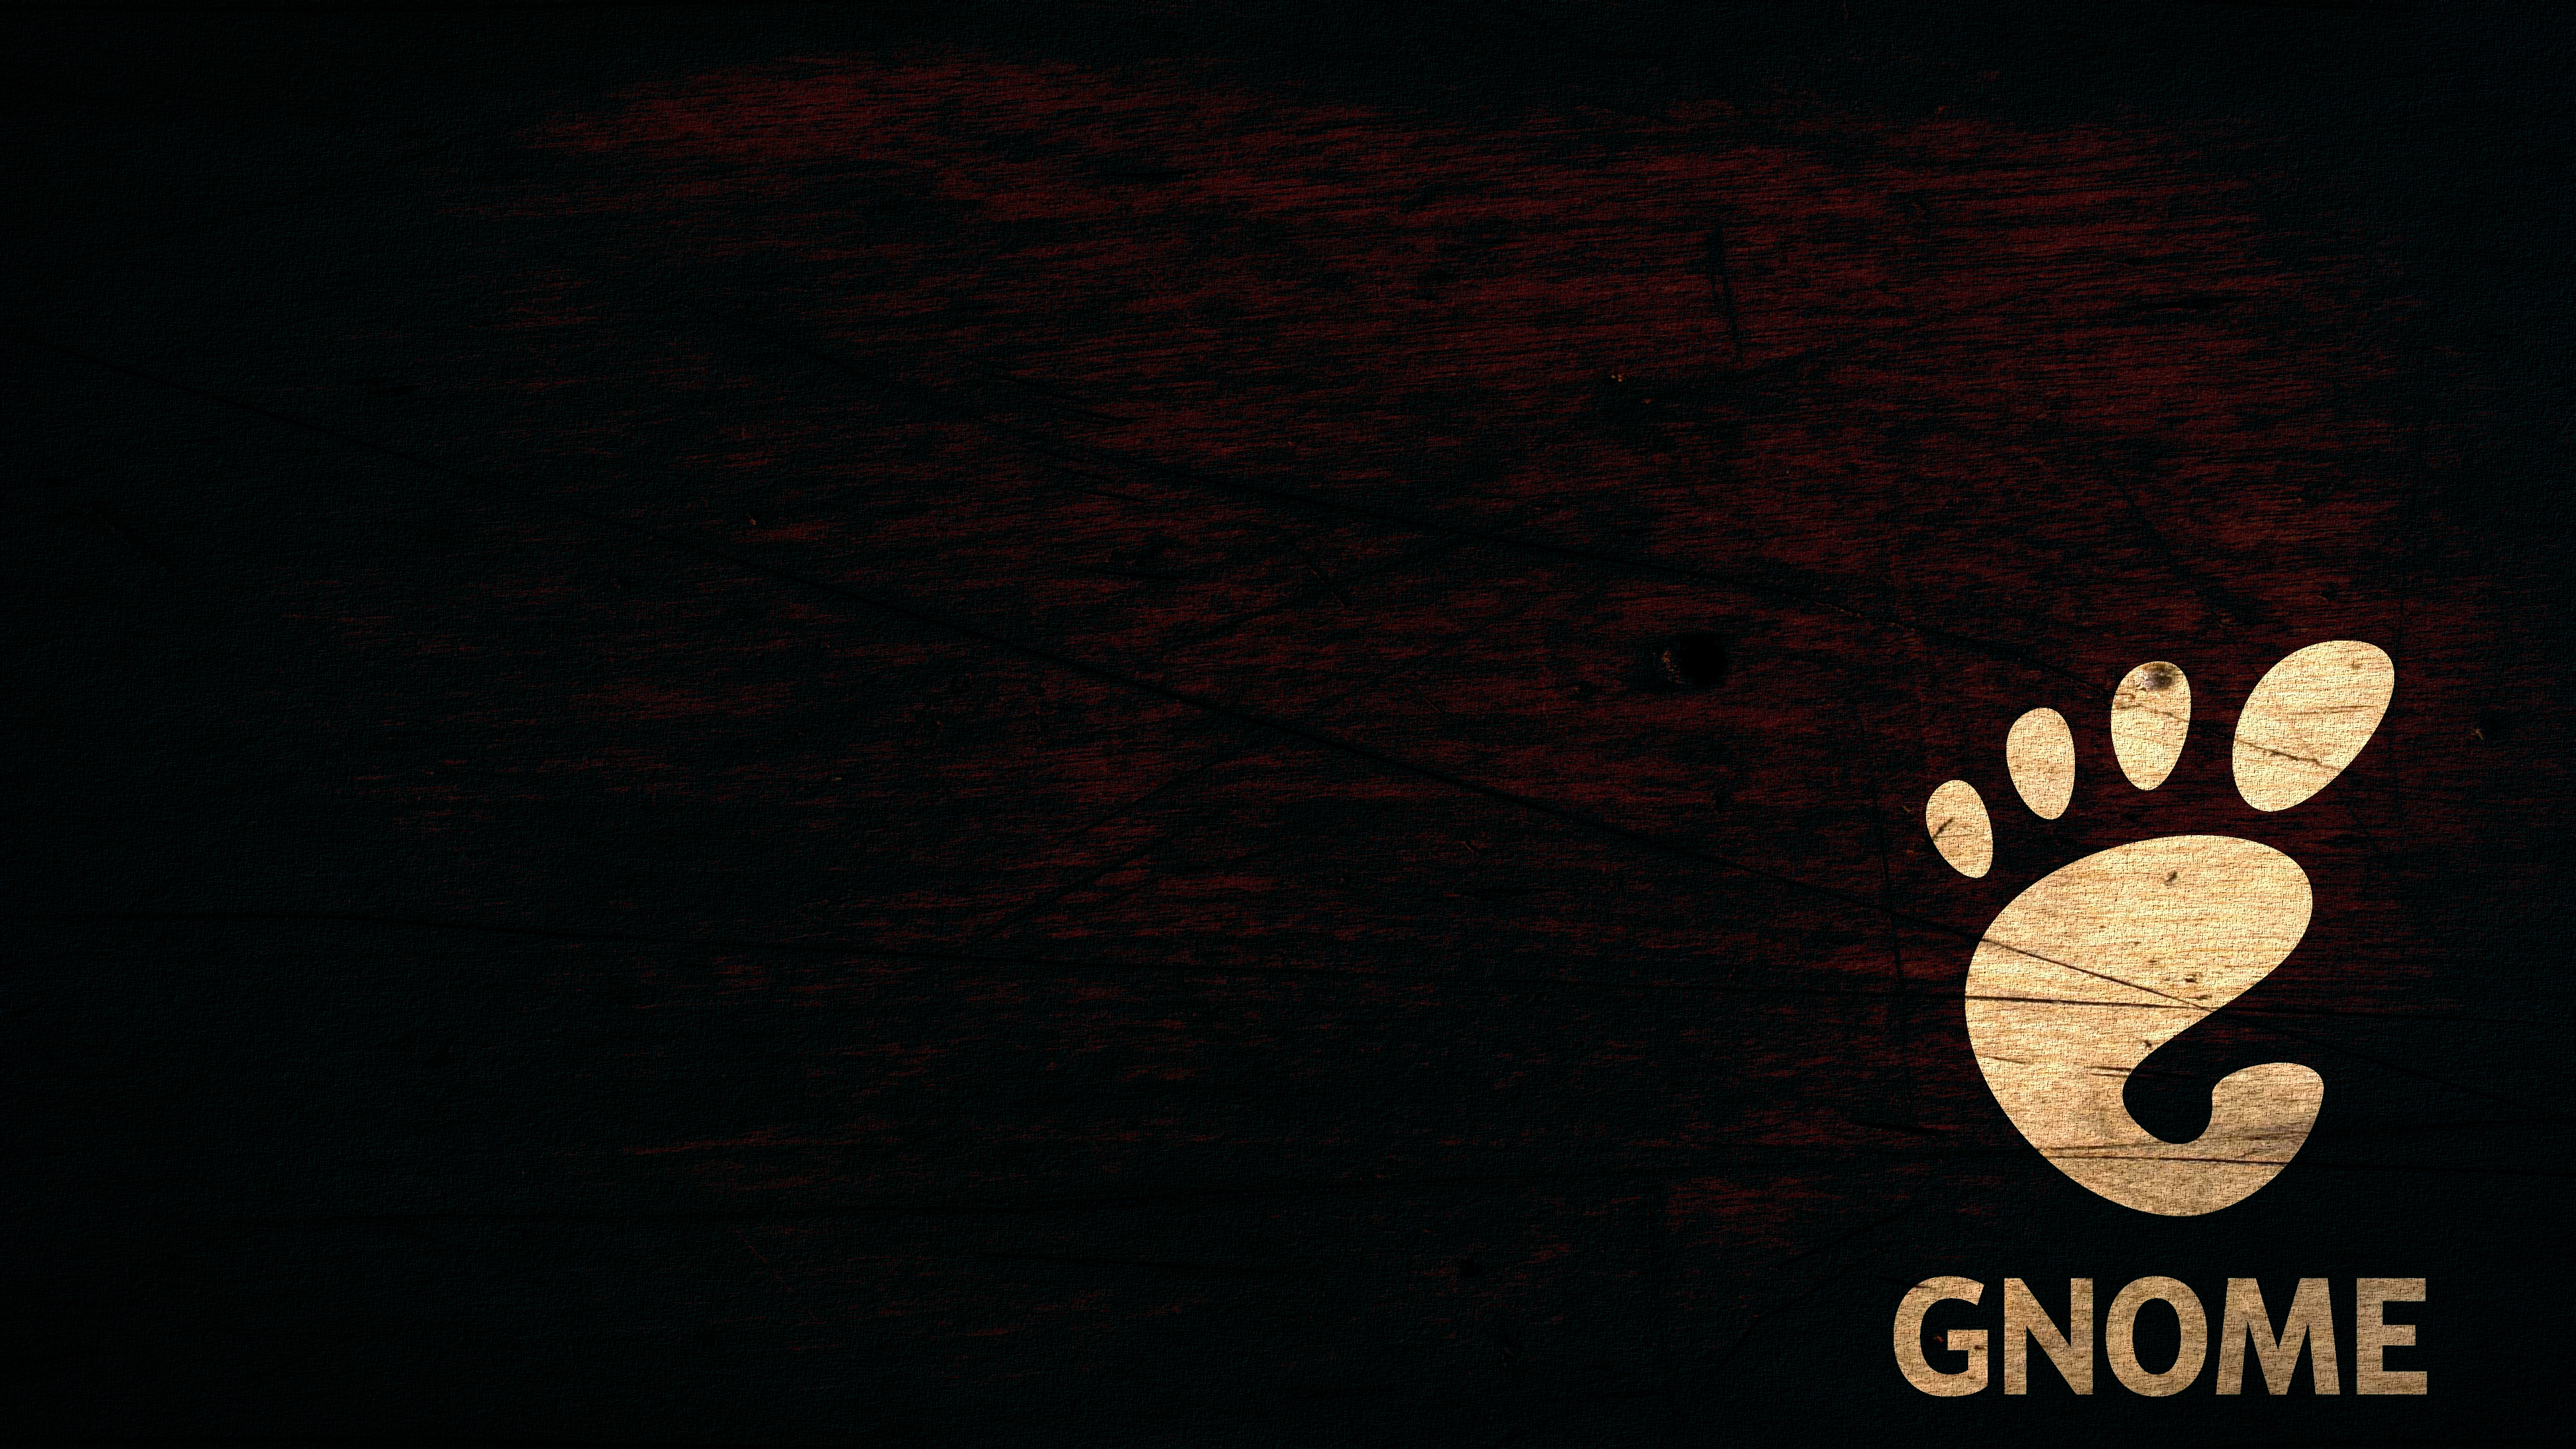 Abstract GNOME Dark Wood Linux 3840x2160